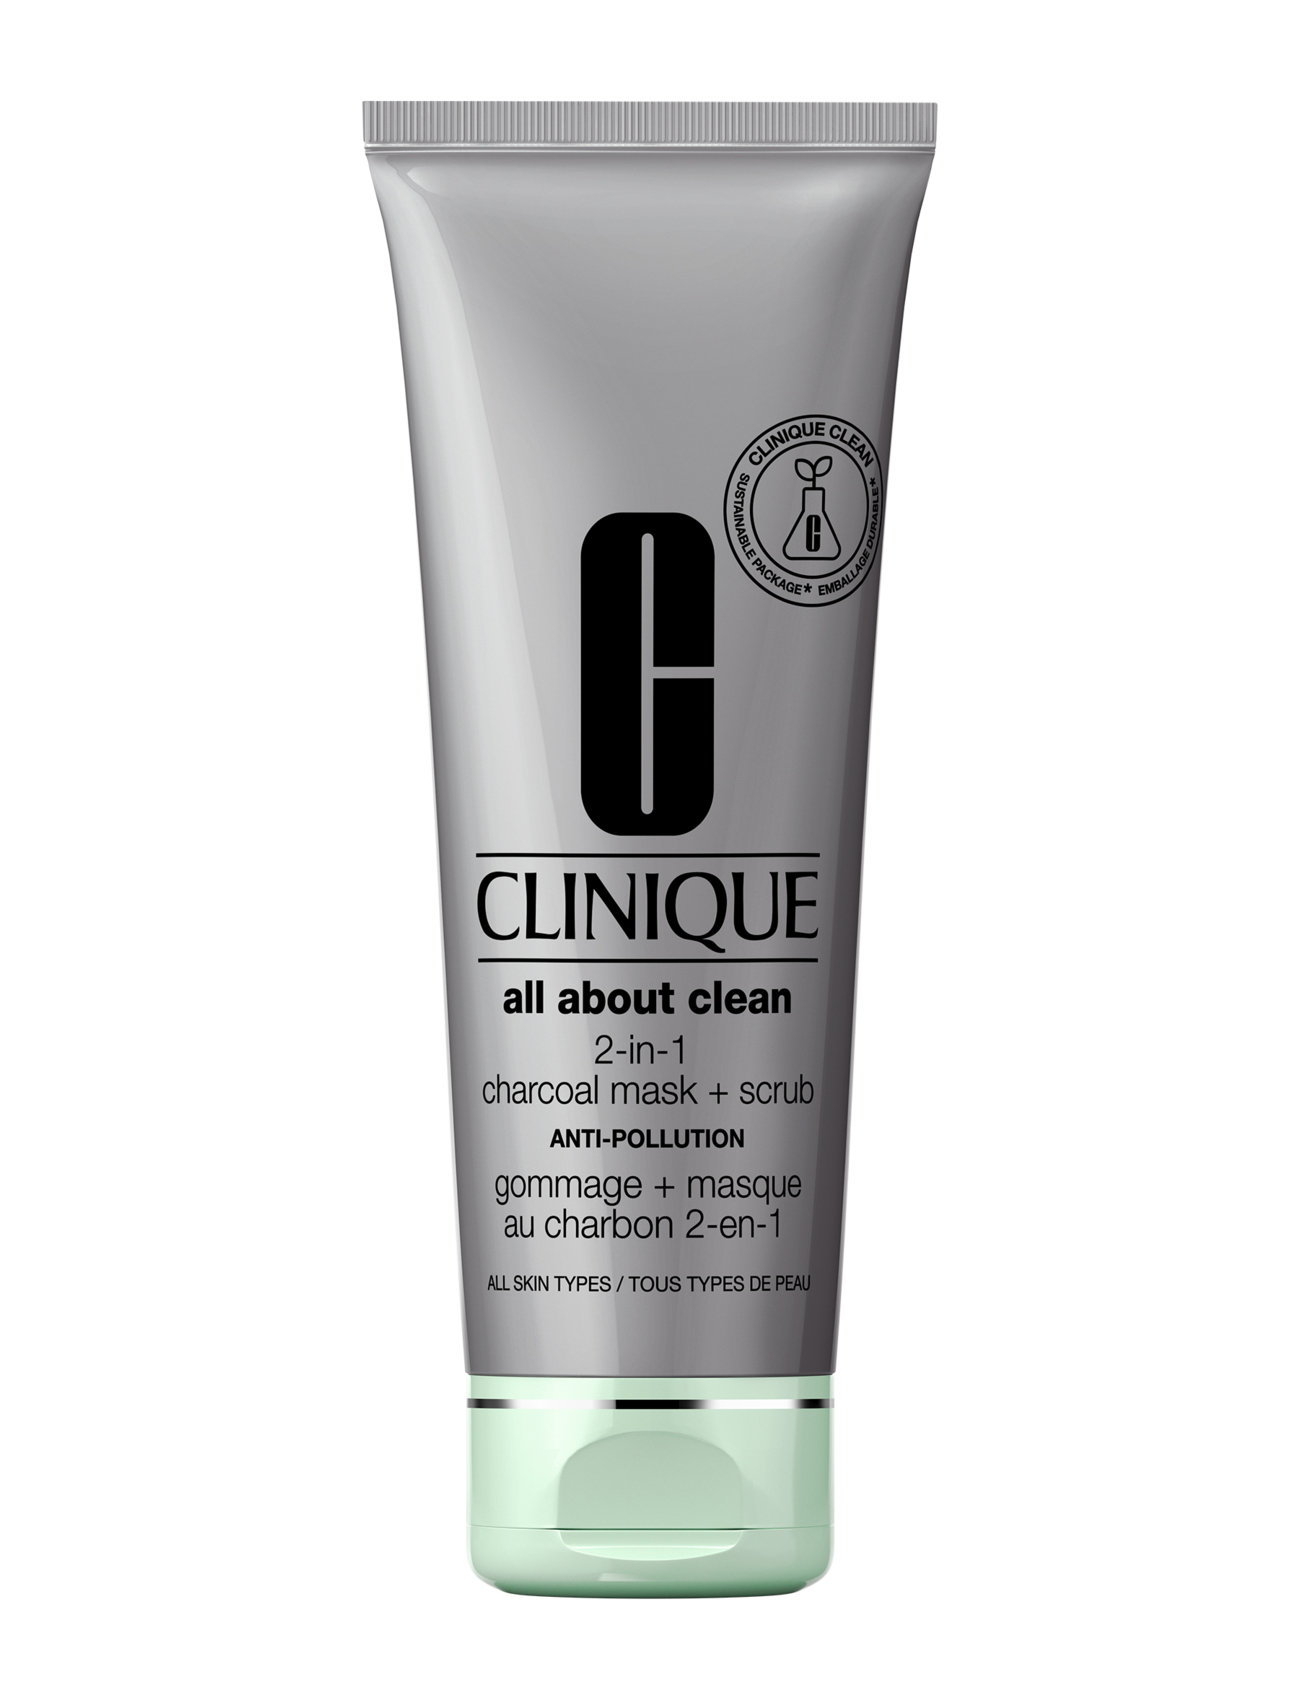 Clinique "All About Clean Charcoal Mask + Scrub Anti-Pollution Beauty Women Skin Care Face Masks Clay Nude Clinique"